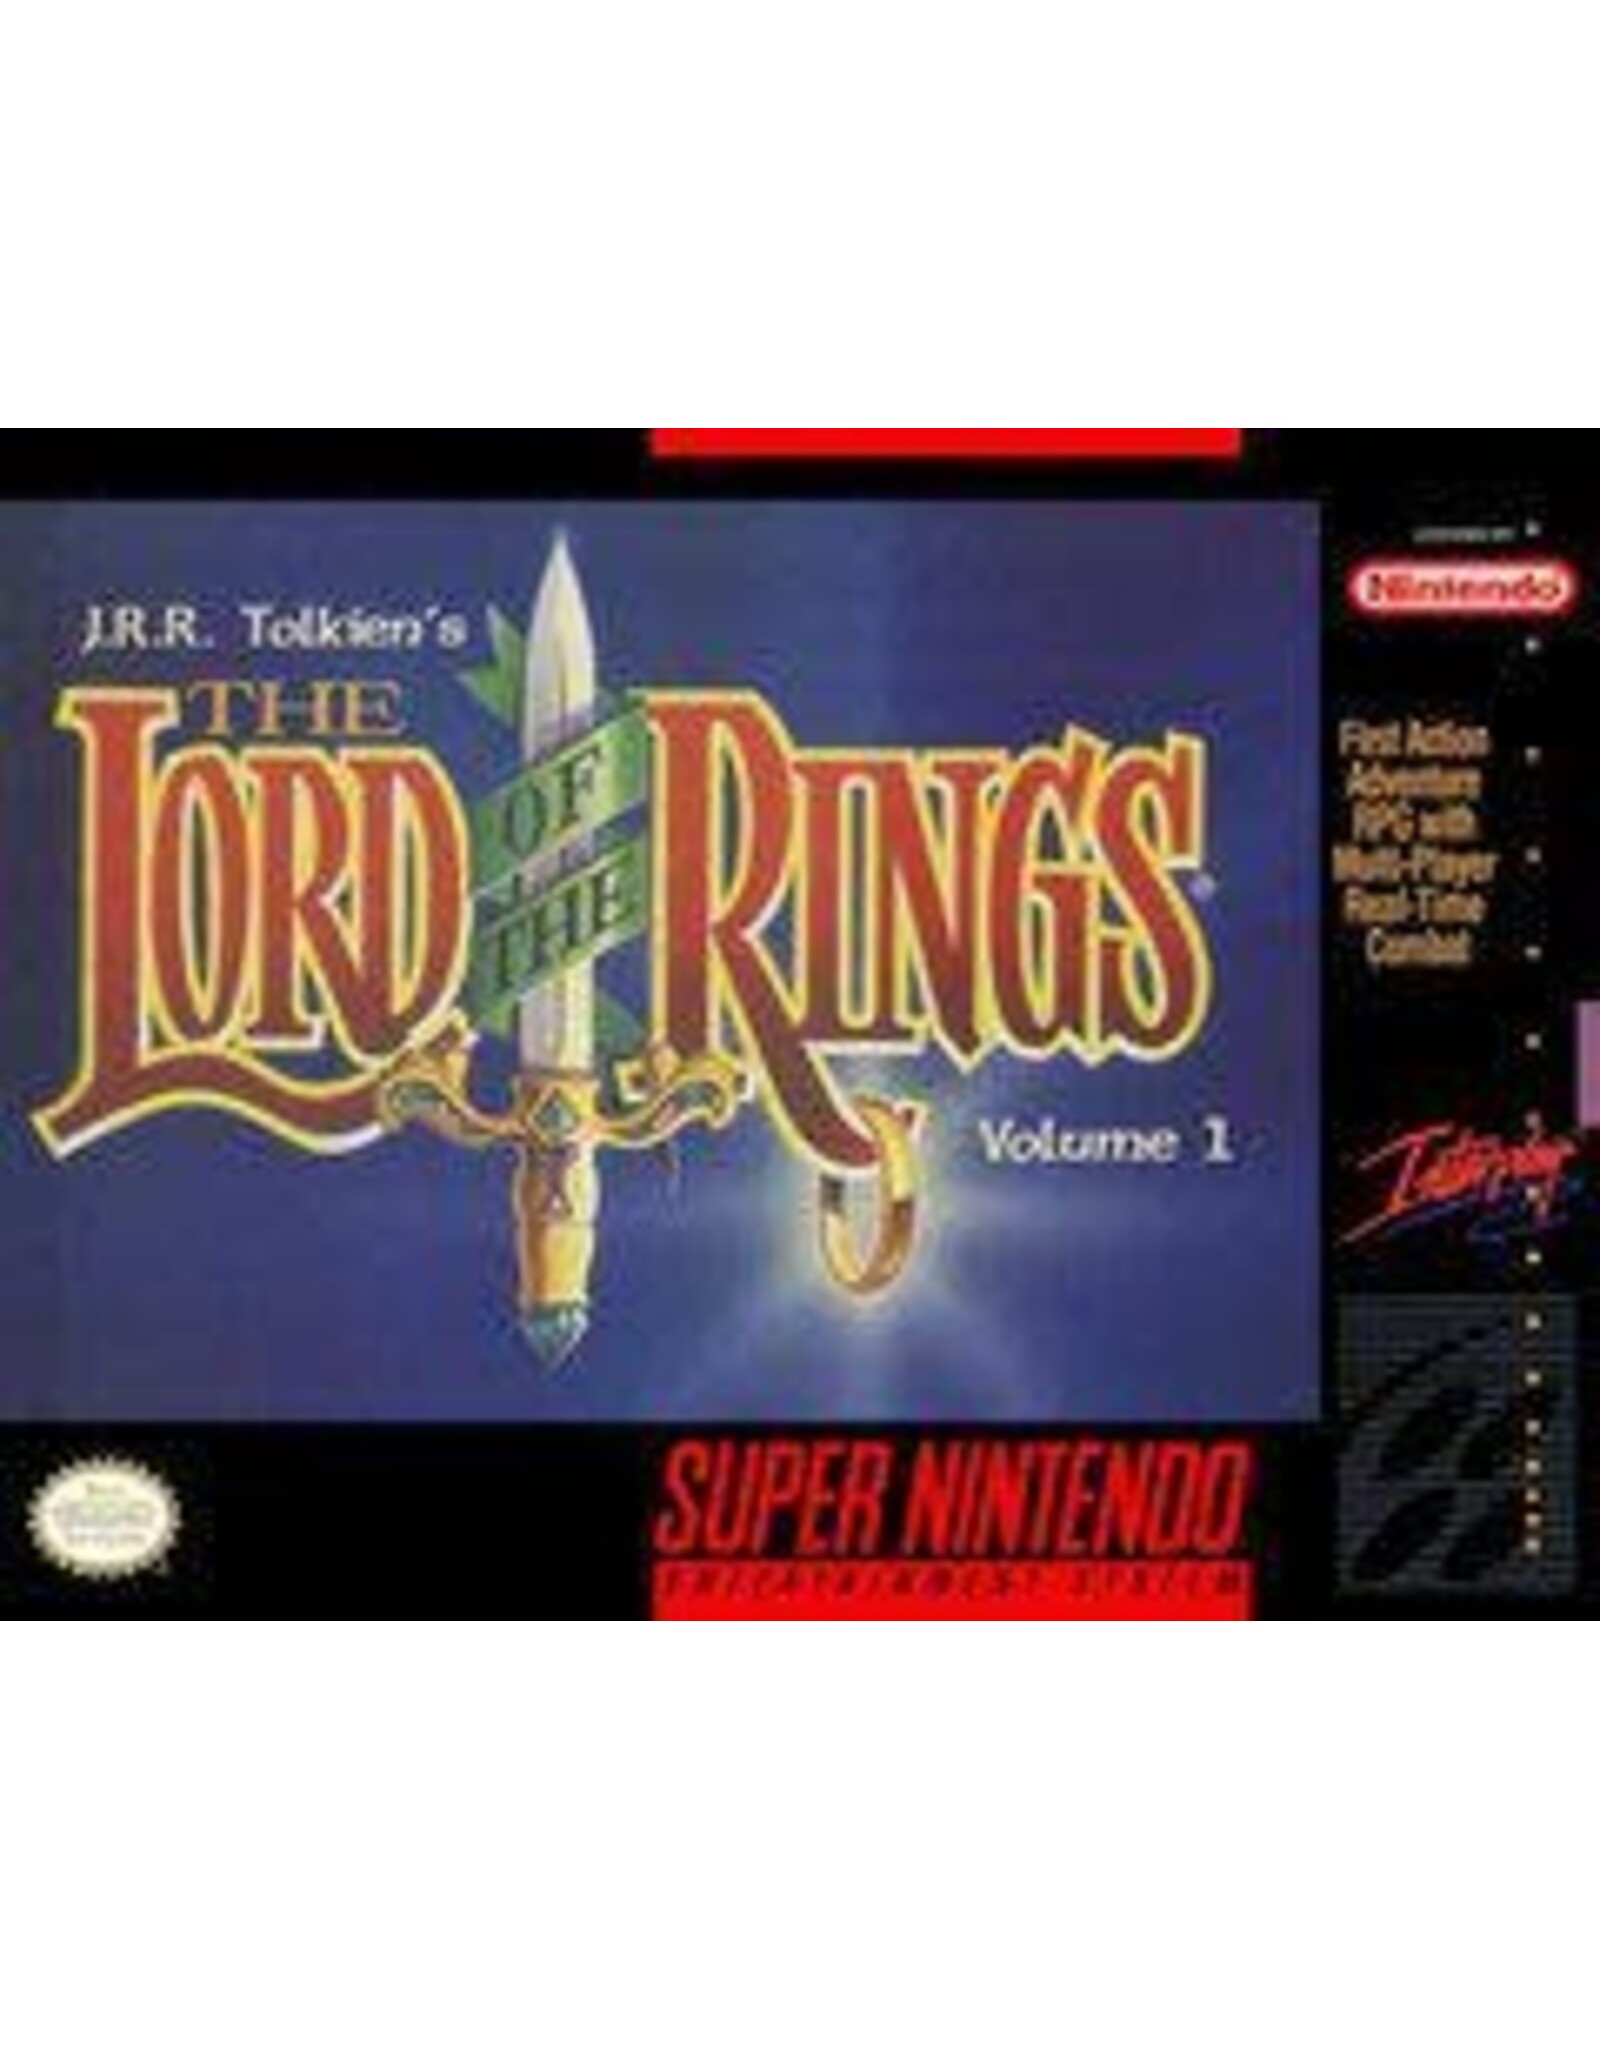 Super Nintendo Lord of the Rings (Cart Only, Damaged Cart)